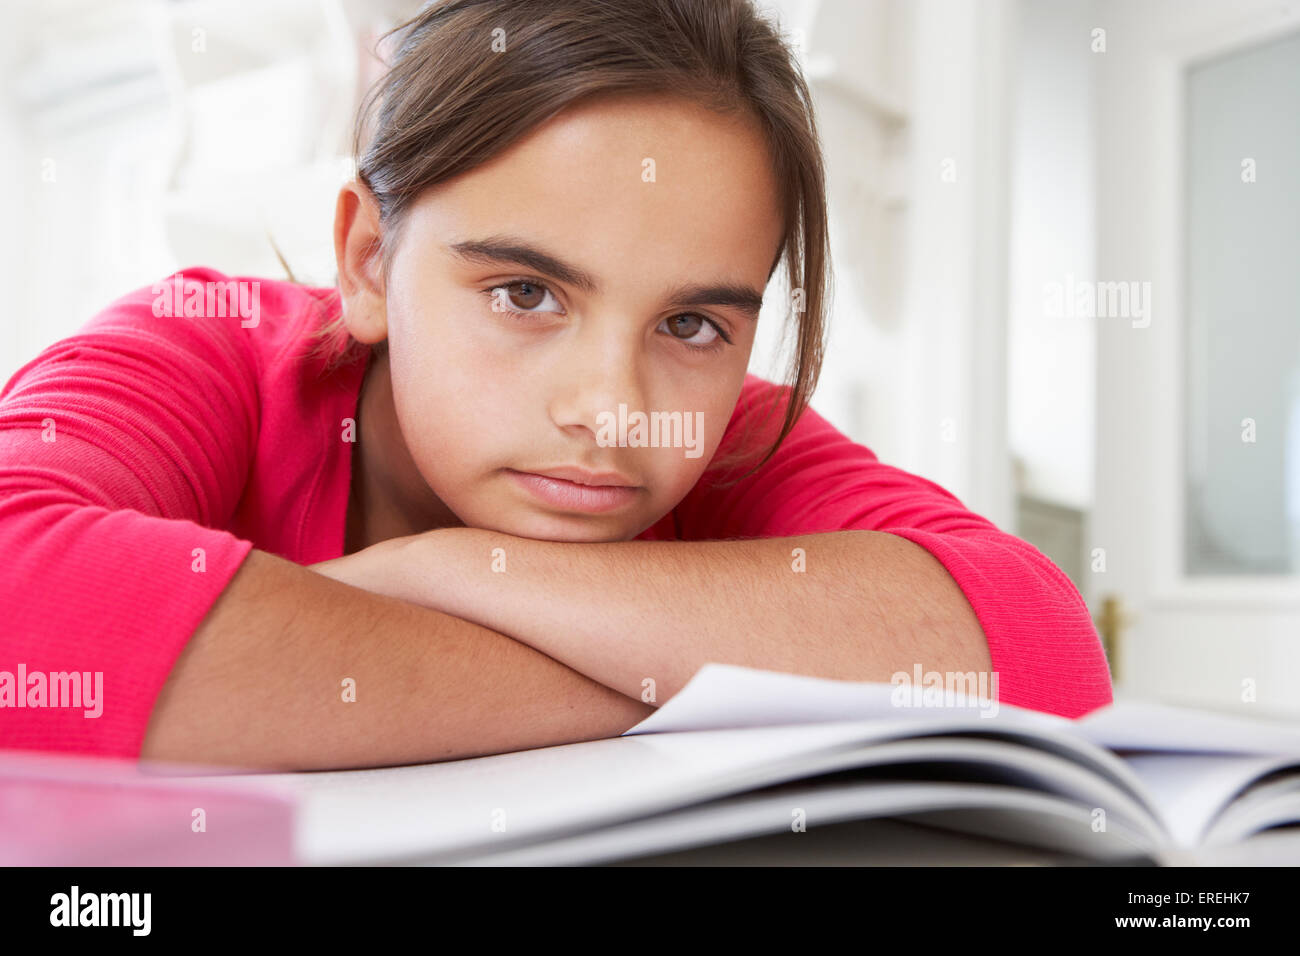 Bored Young Girl Doing Homework At Desk In Bedroom Stock Photo